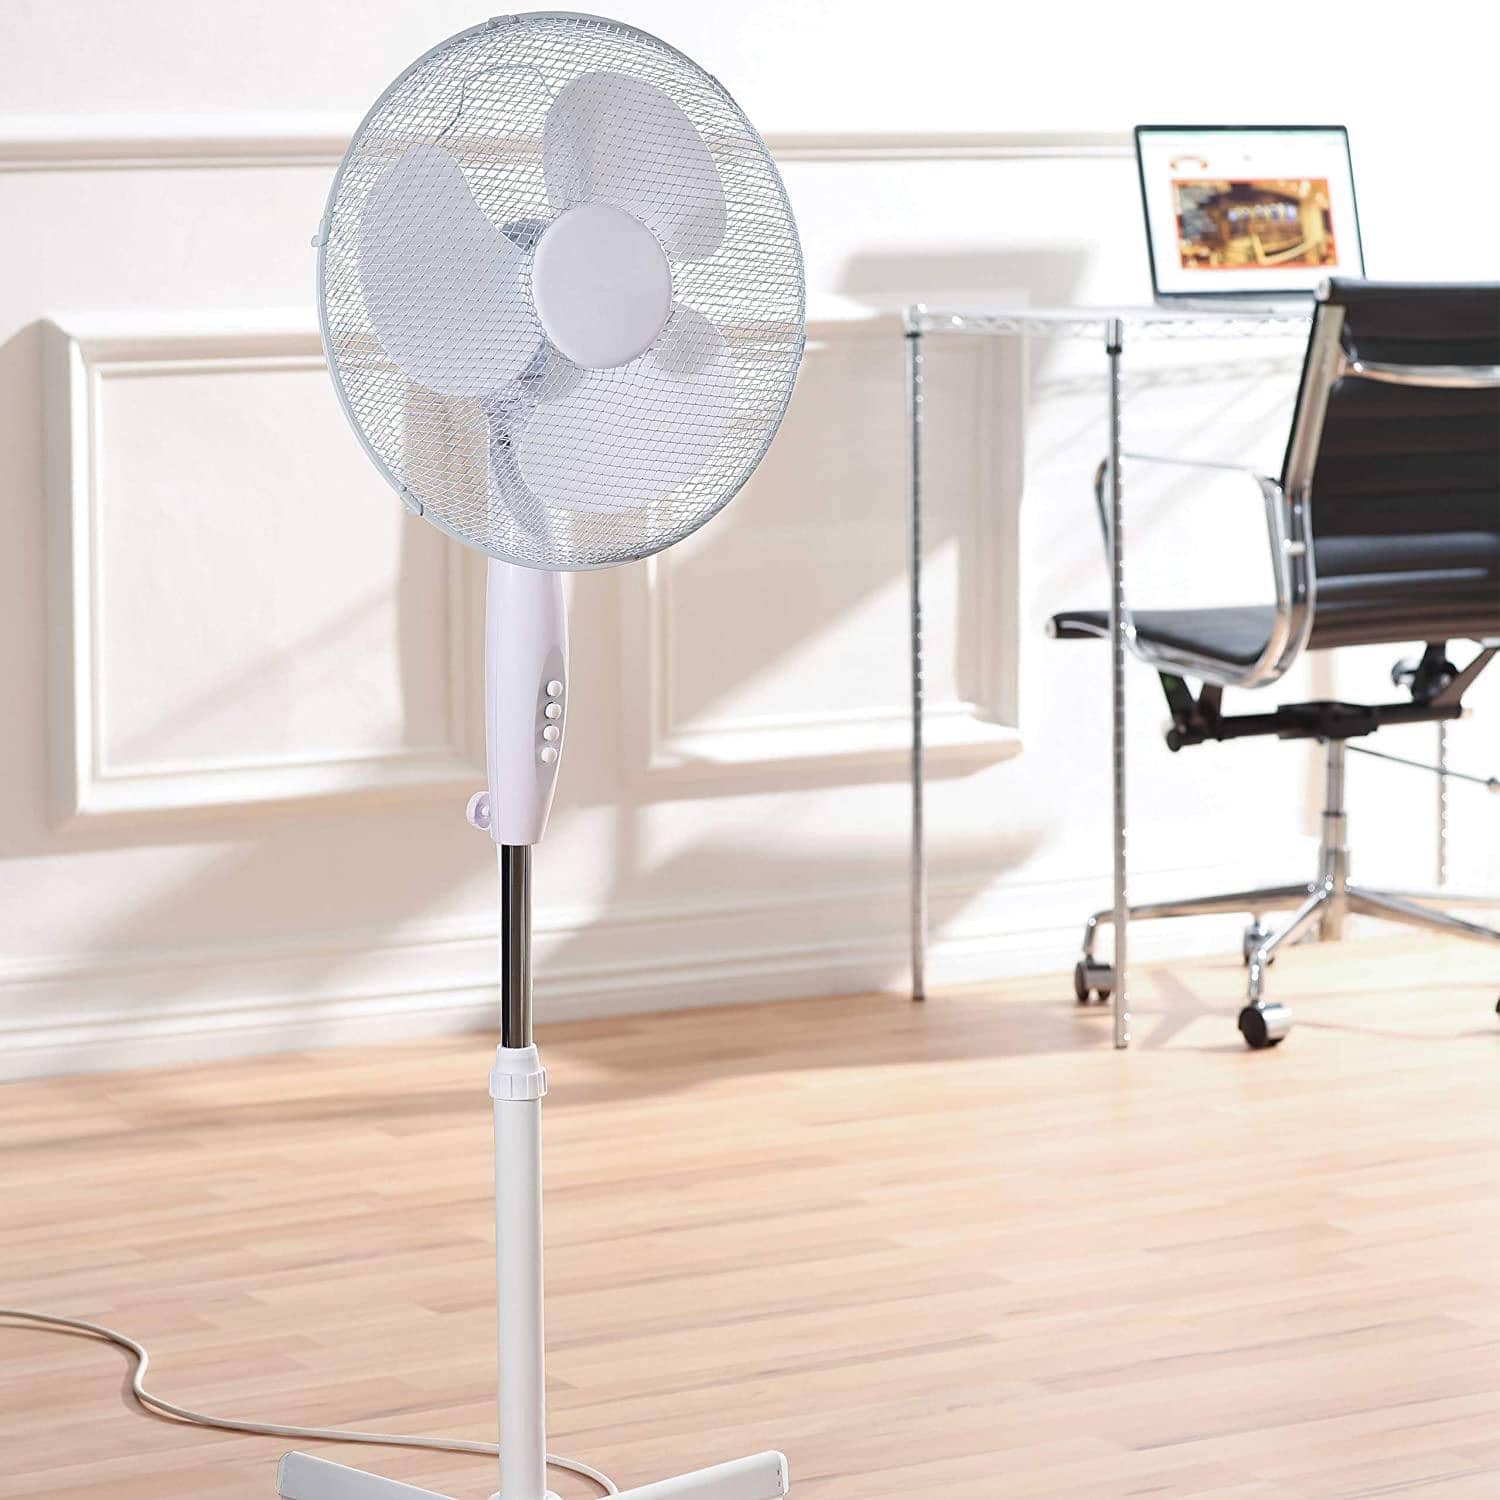 1 x Stand Fan 16 Inch Livingshire 16 3-Speed Pedestal Adjustable in Height with Oscillation feature and Tilt-back Fan Head White Standing Fan for Home and Office 